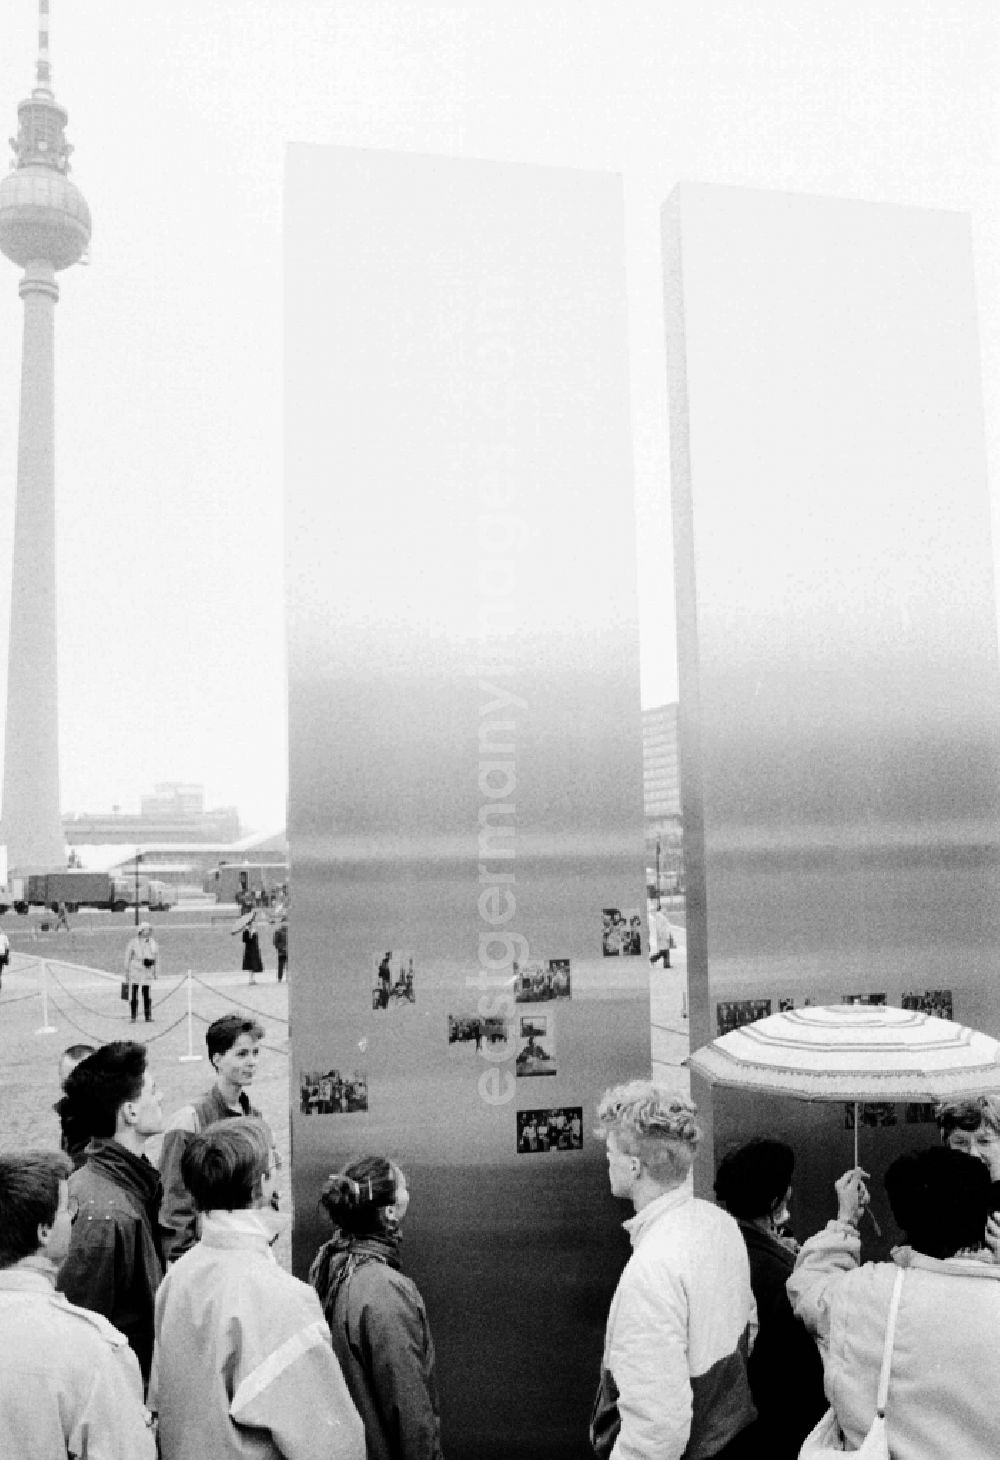 GDR image archive: Berlin - Inauguration of the Marx Engels Forum with Erich Honecker in the district Mitte in Berlin Eastberlin on the territory of the former GDR, German Democratic Republic